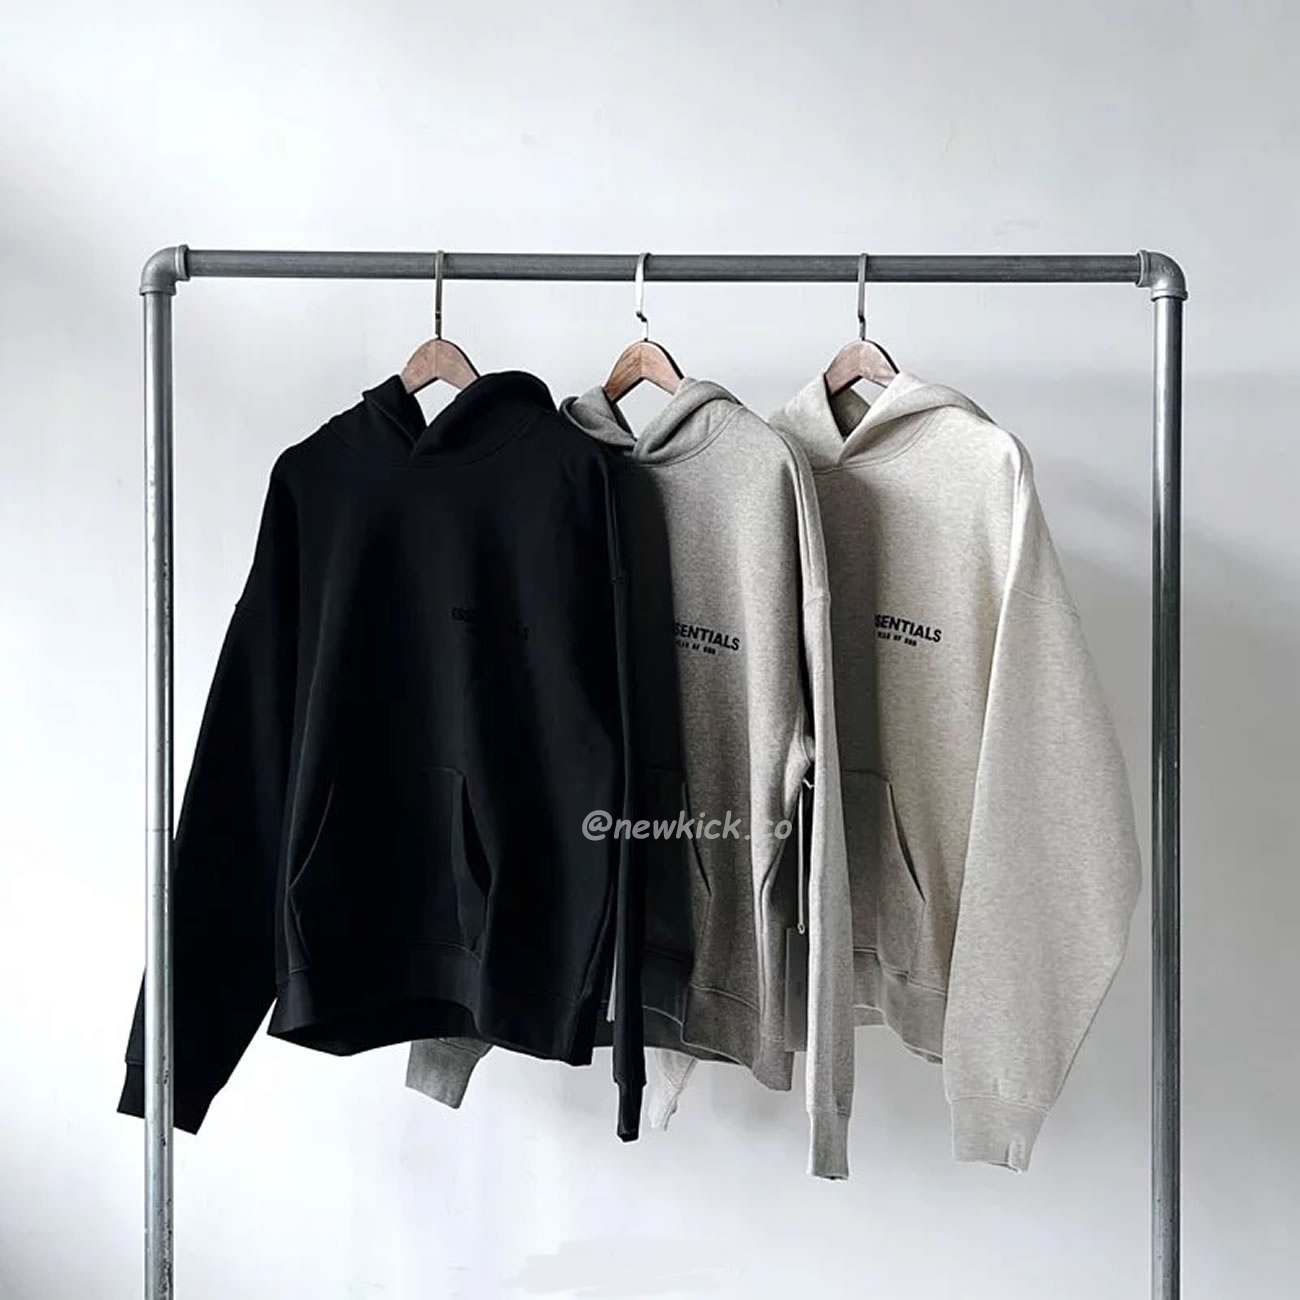 Fear Of God Essentials Core Collection Kids Pullover Hoodie Dark Heather Oatmeal (5) - newkick.org